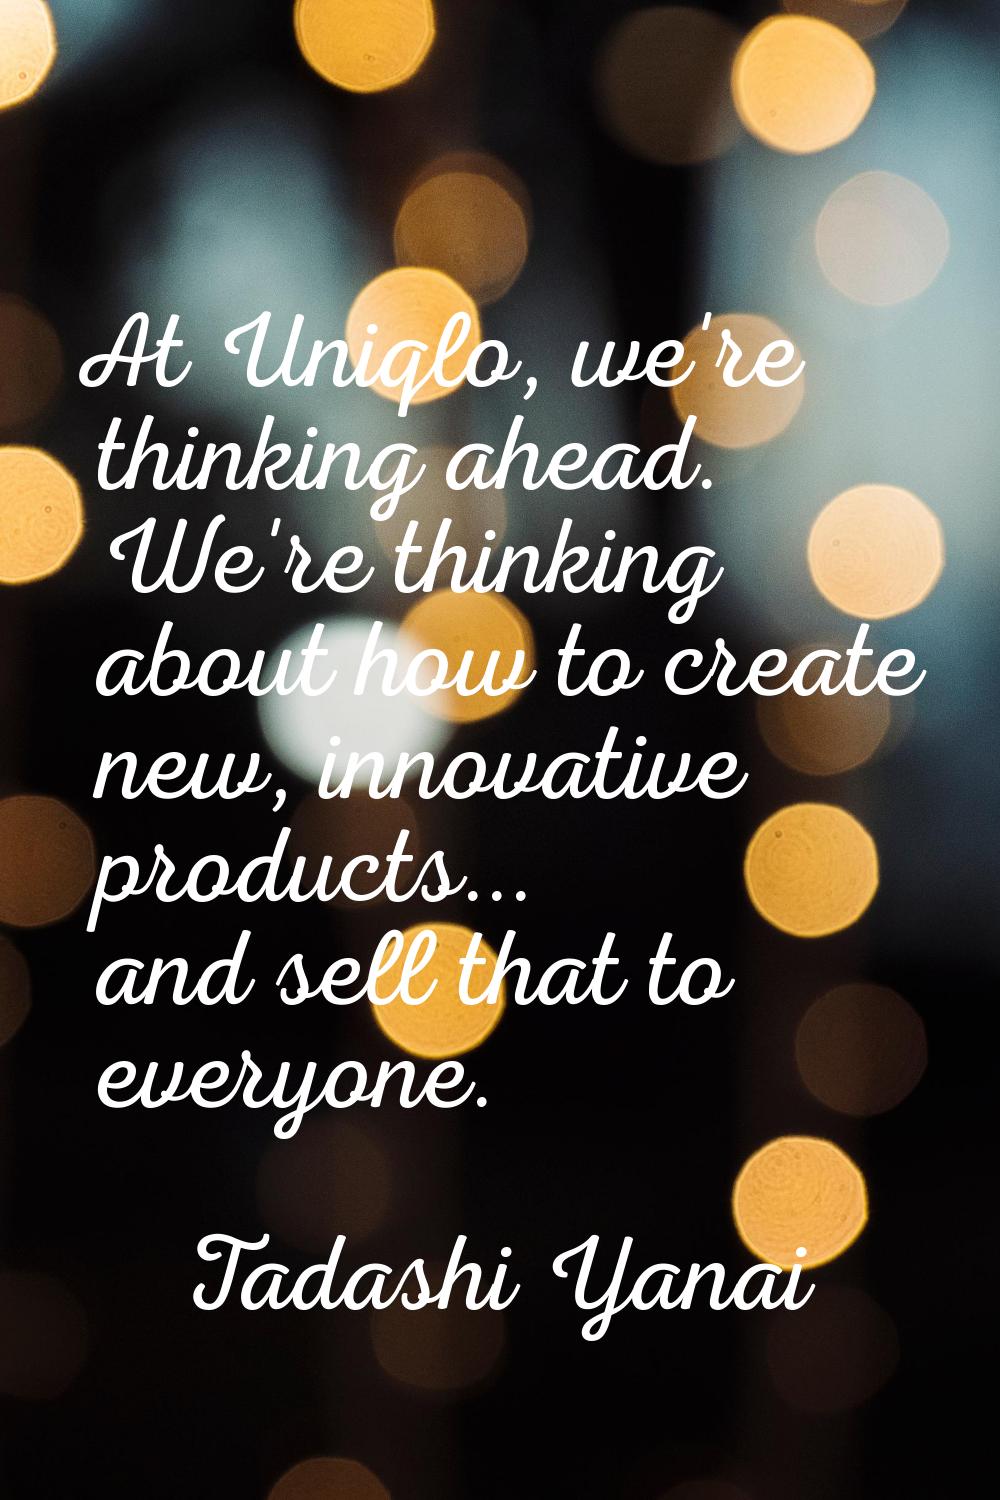 At Uniqlo, we're thinking ahead. We're thinking about how to create new, innovative products... and